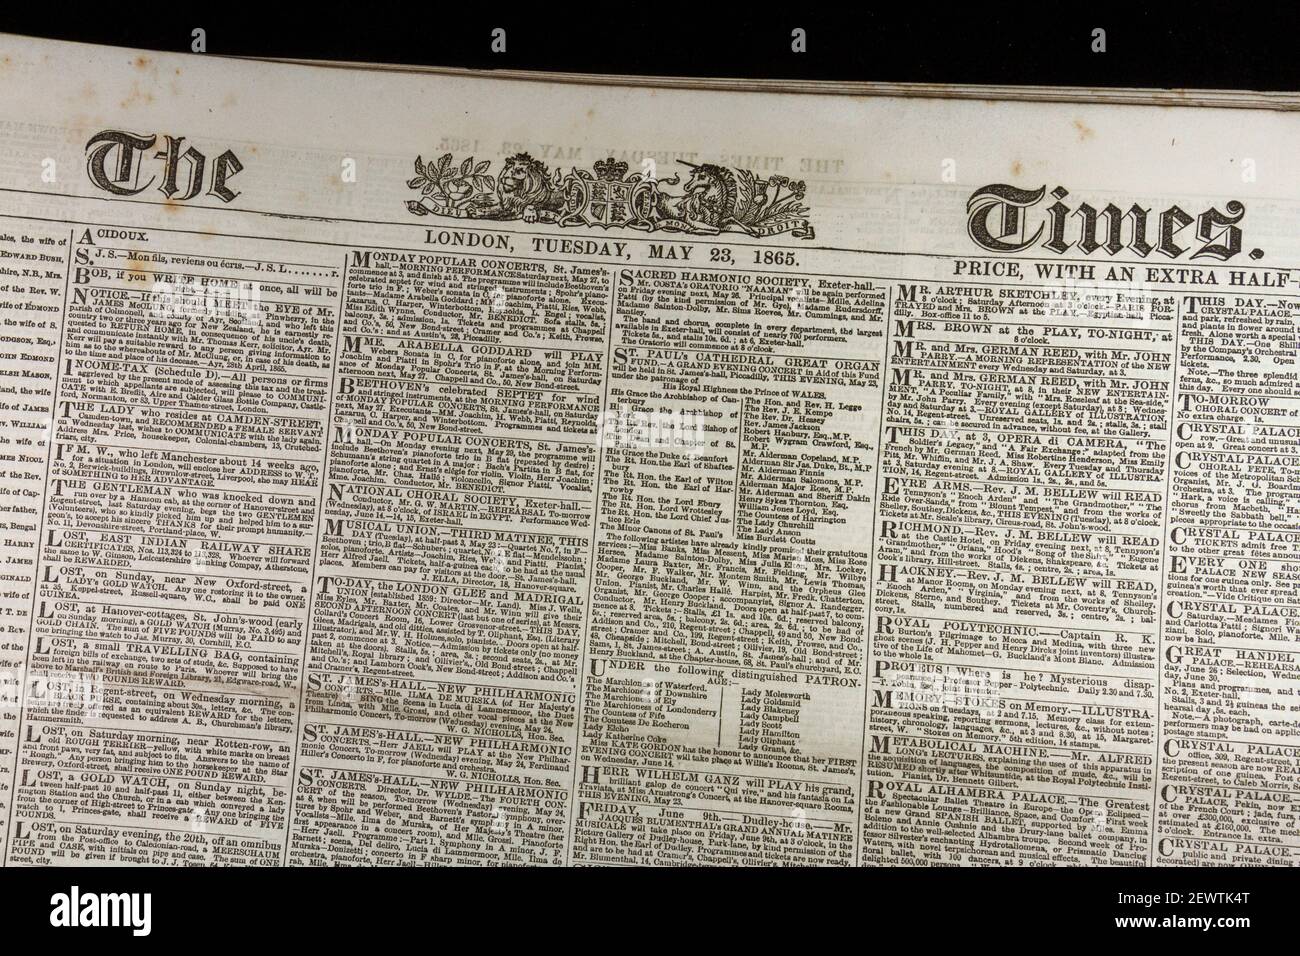 The masthead and top articles on the front page of The Times newspaper (Tuesday 23rd May 1865), London, UK. Stock Photo